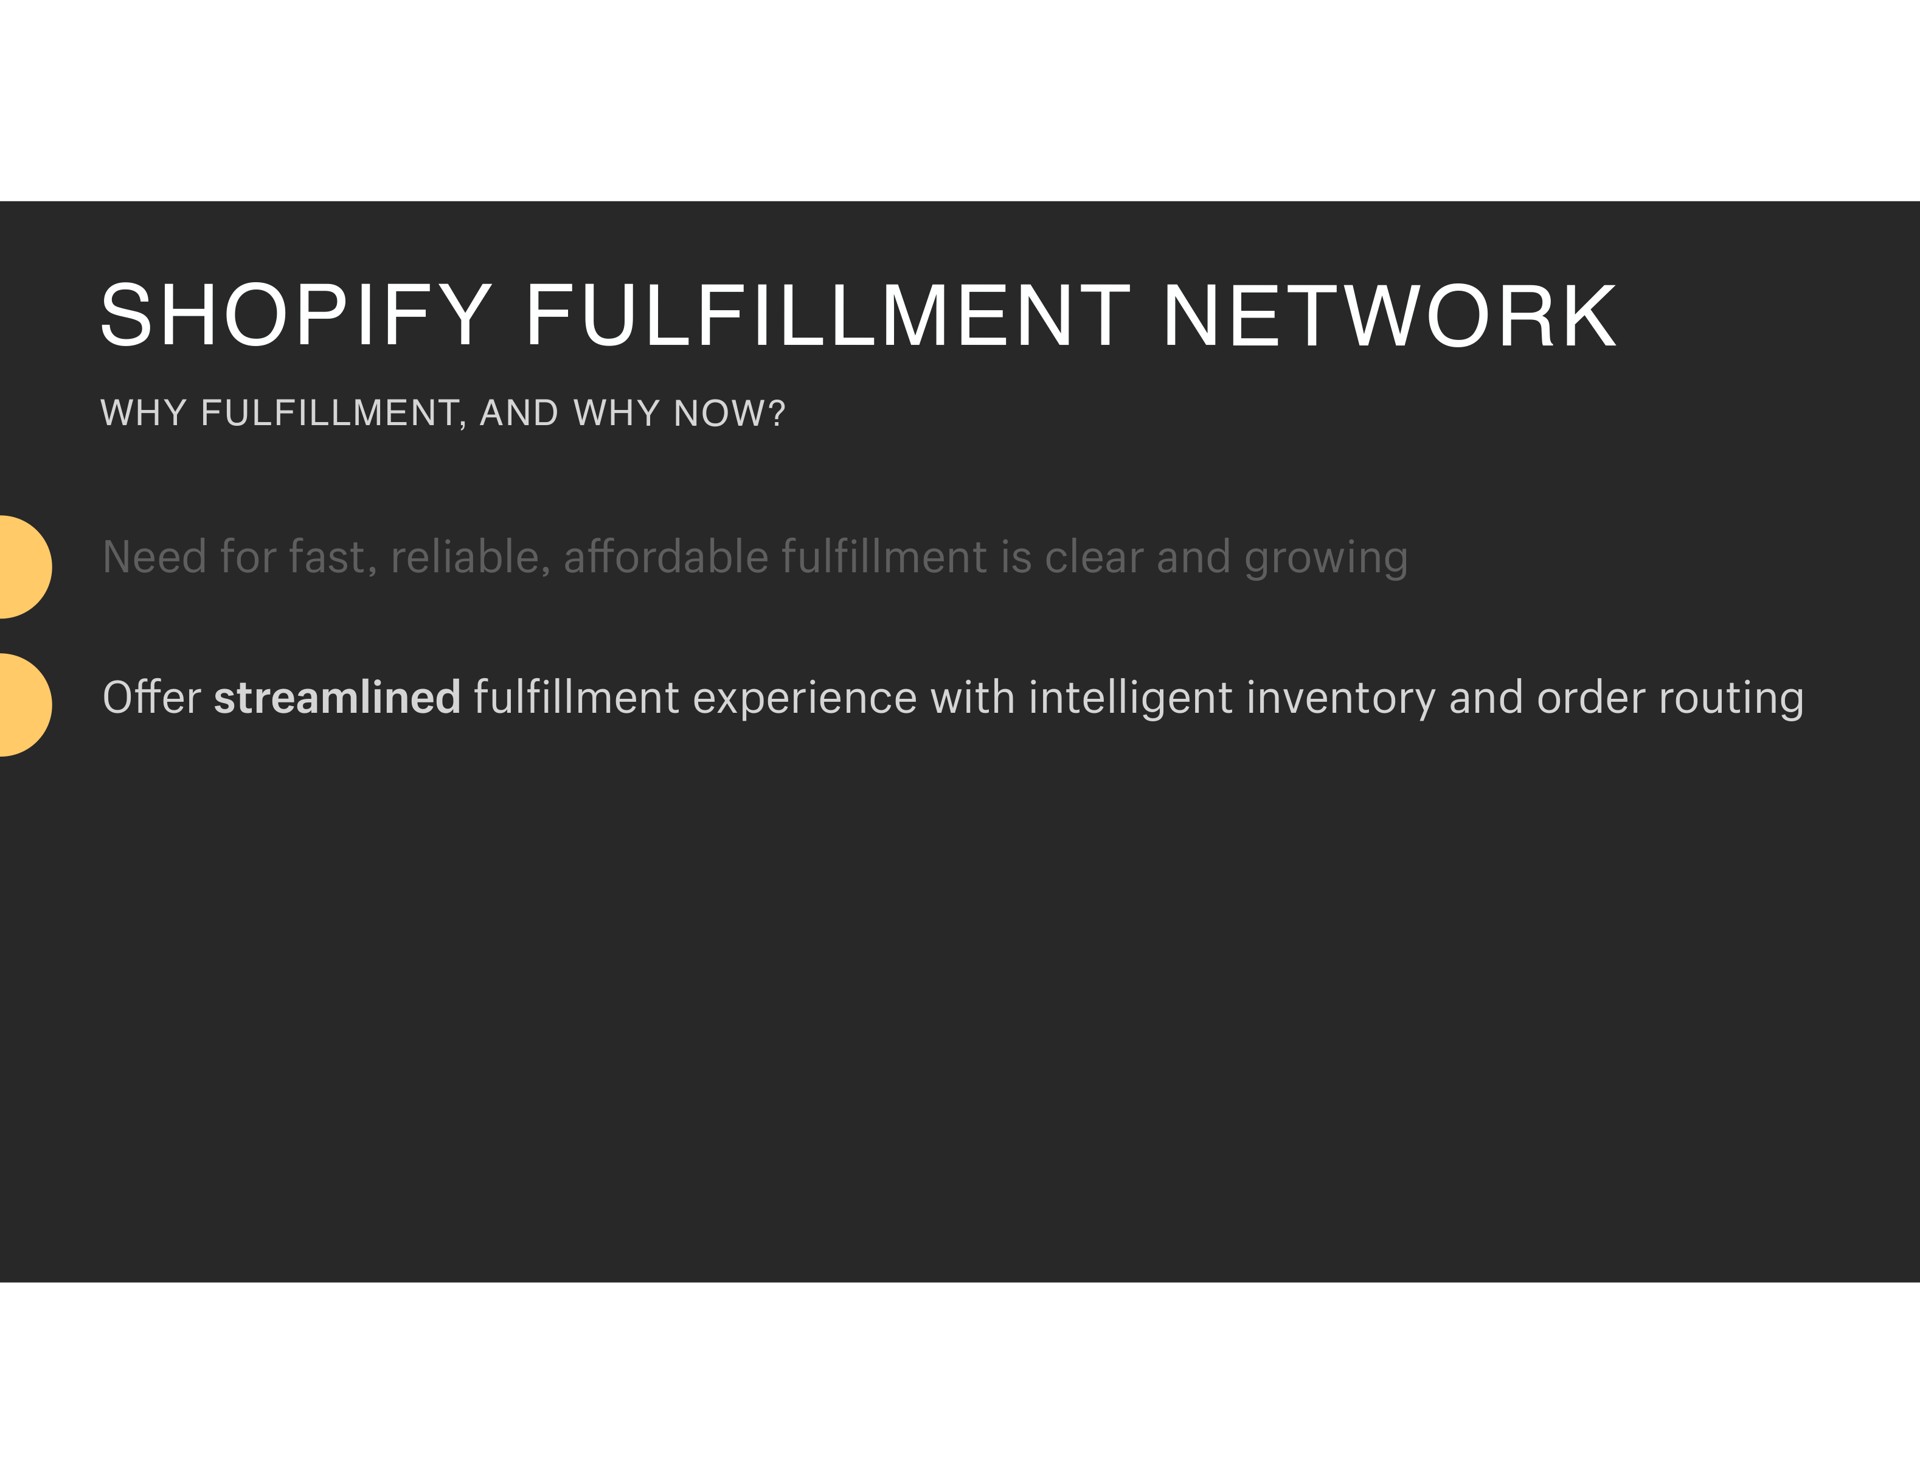 fulfillment network need for fast reliable affordable fulfillment is clear and growing offer streamlined fulfillment experience with intelligent inventory and order routing | Shopify